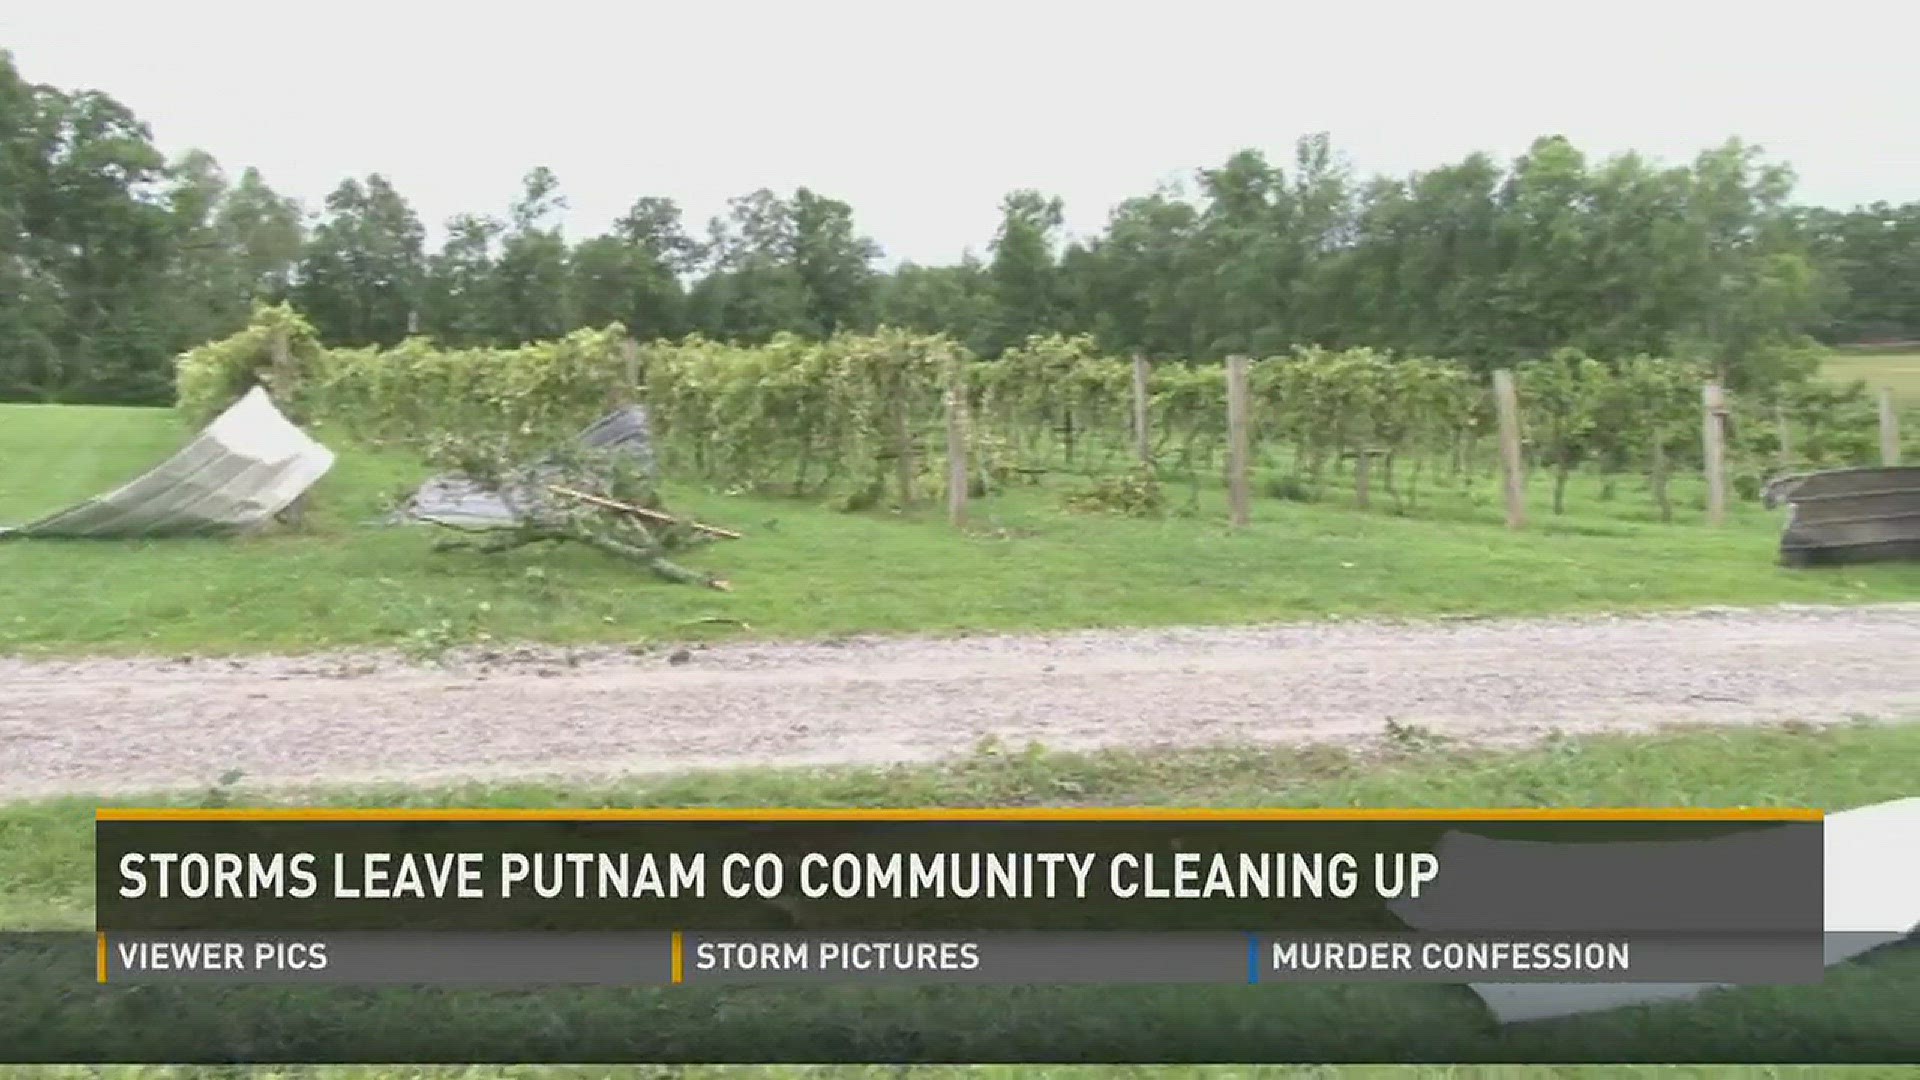 A farm in Putnam County was among the sites suffering damage after a suspected EF1 twister struck. July 14, 2015